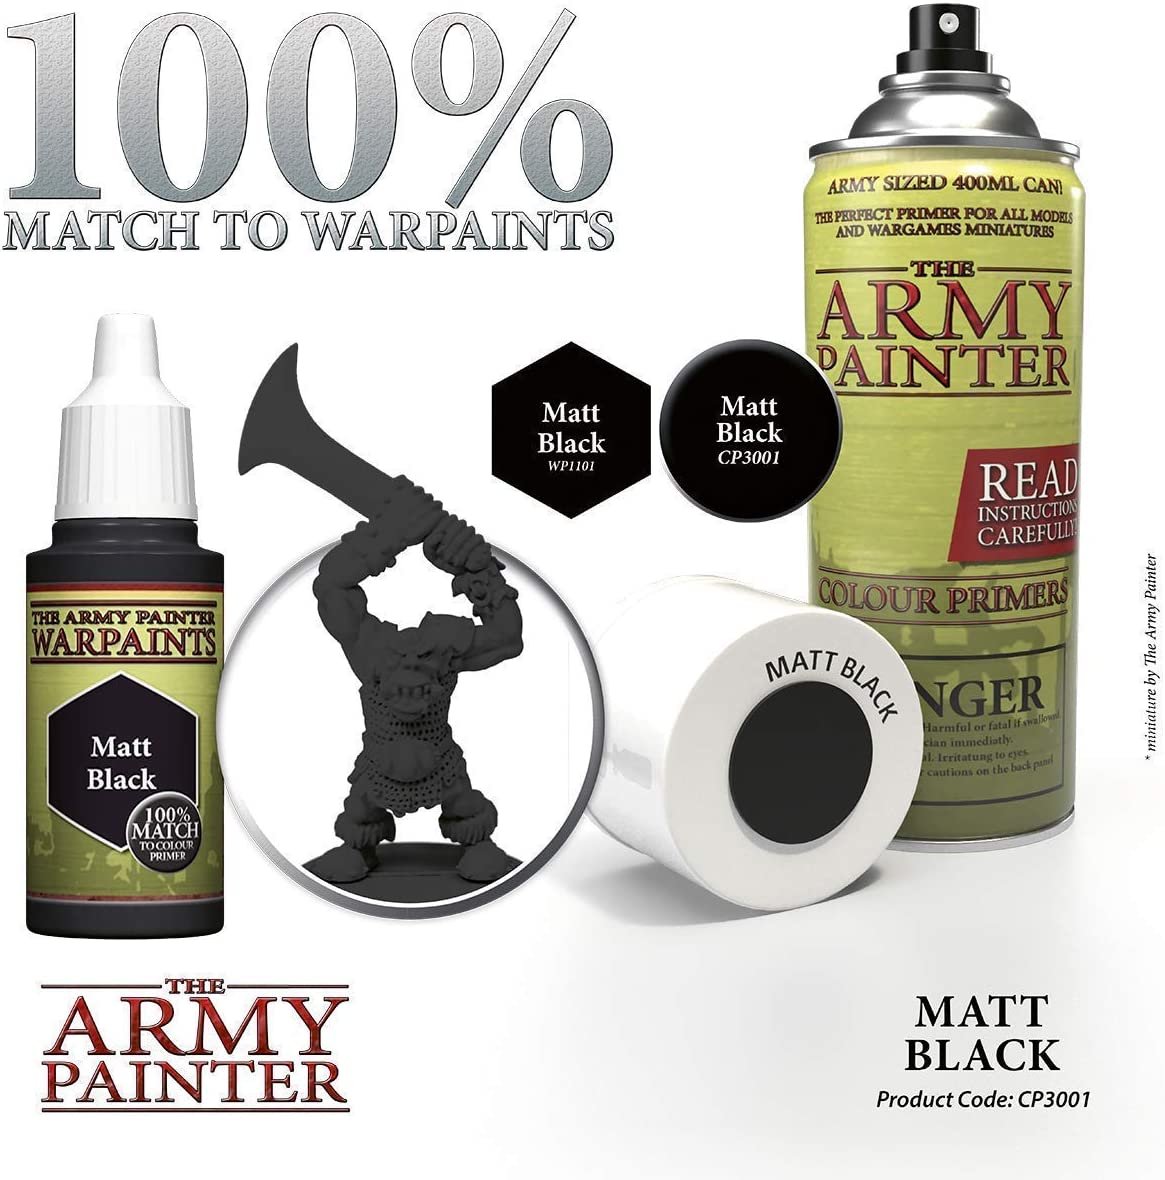 New Release: Army Painter Primer, Files and Basing packs - Warlord